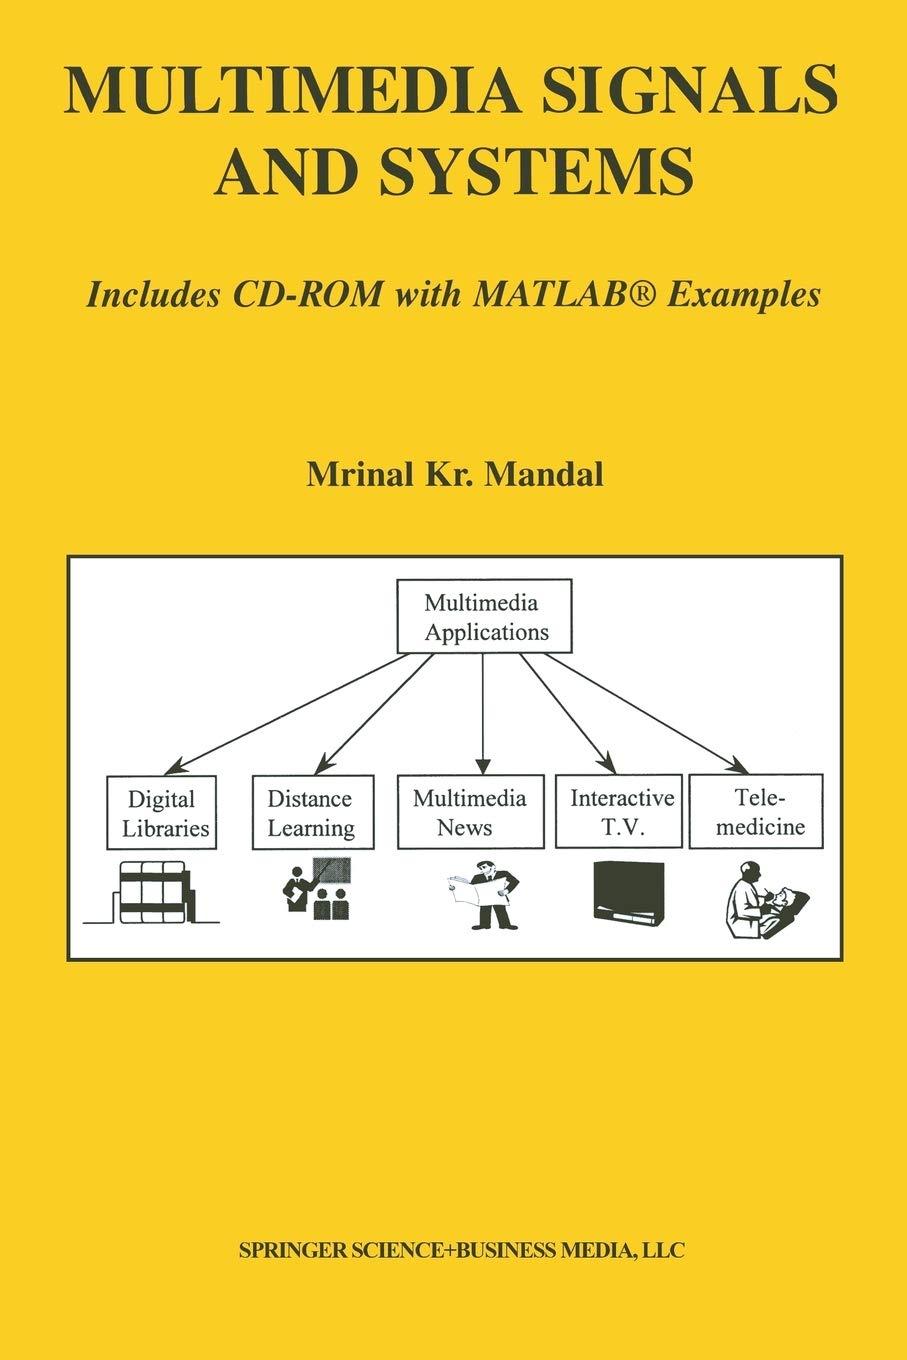 multimedia signals and systems 2003 edition mrinal kr. mandal 46134994x, 978-1461349945